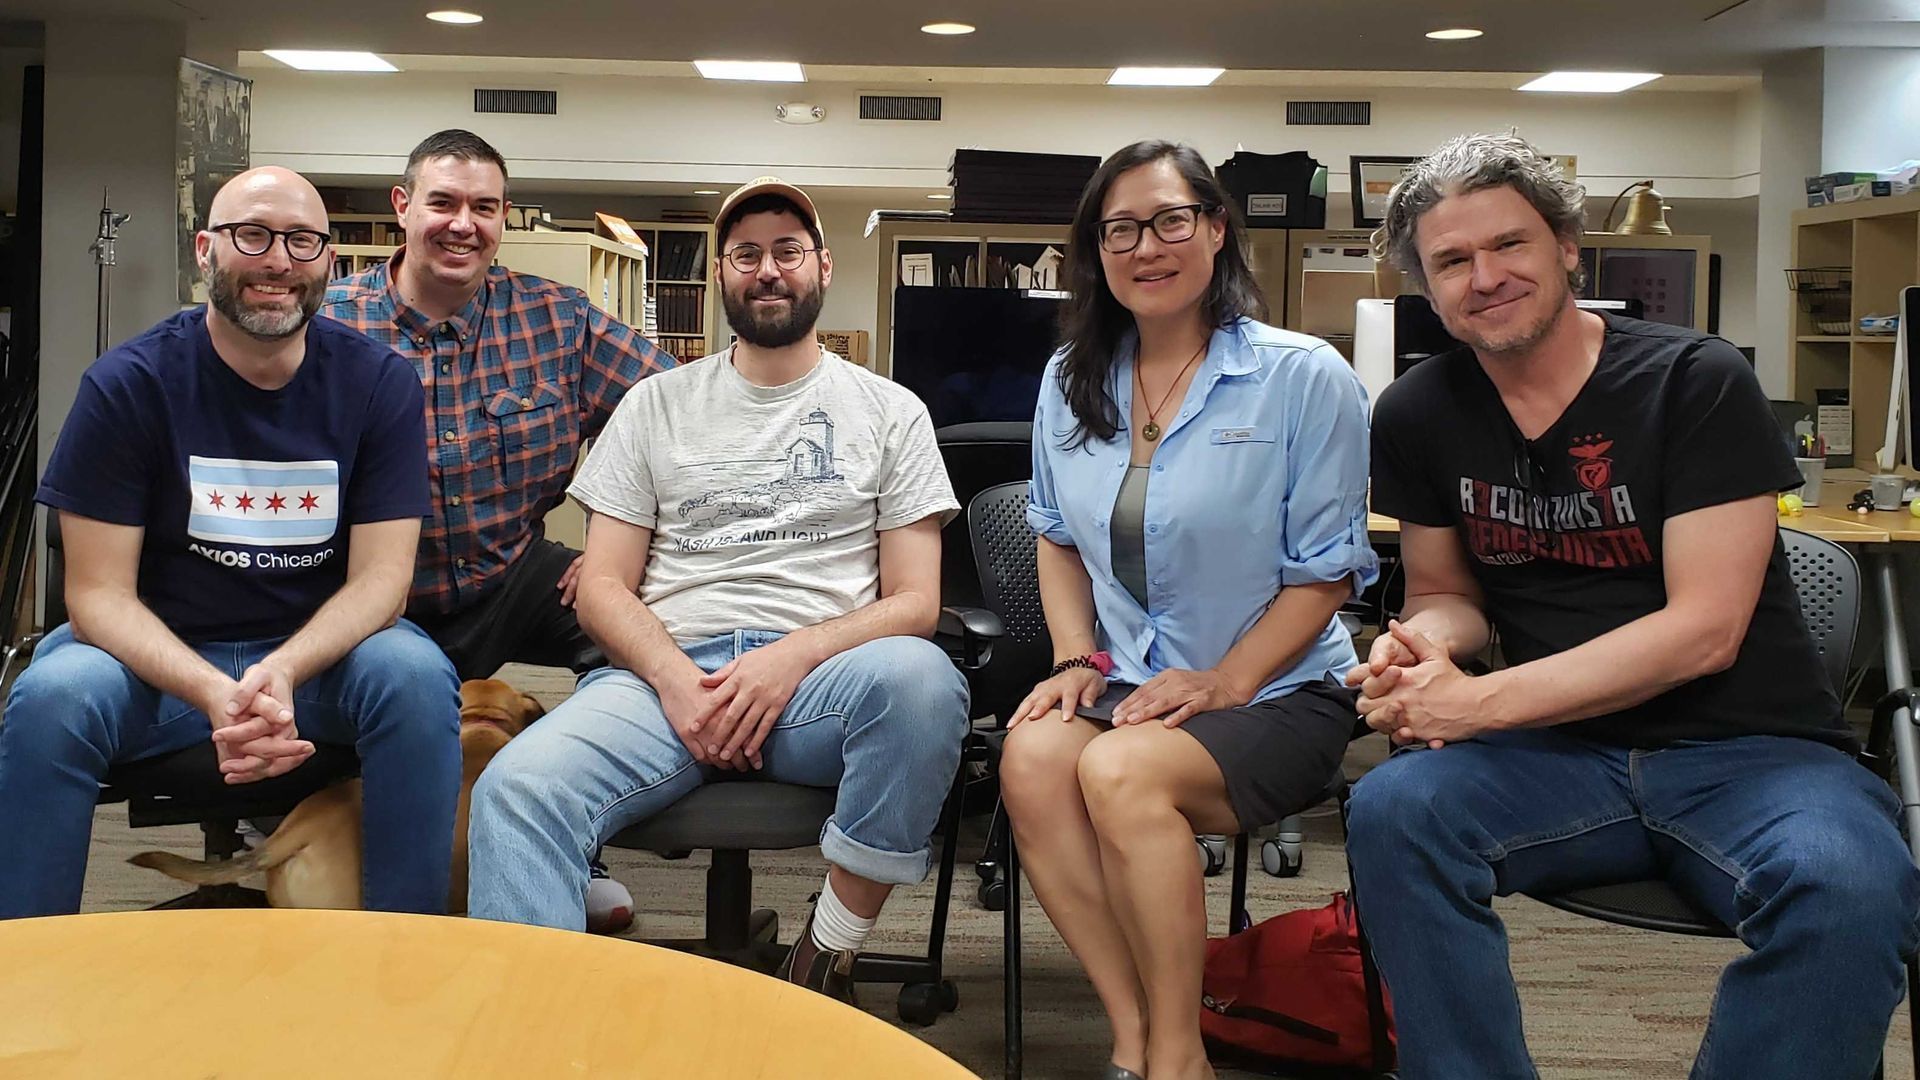 Justin Kaufmann, Jordan Dziura of Illini Media, Daniel Gumbiner of The Believer, Monica Eng and Dave Eggers smile while seated in chairs in a University of Illinois classroom.